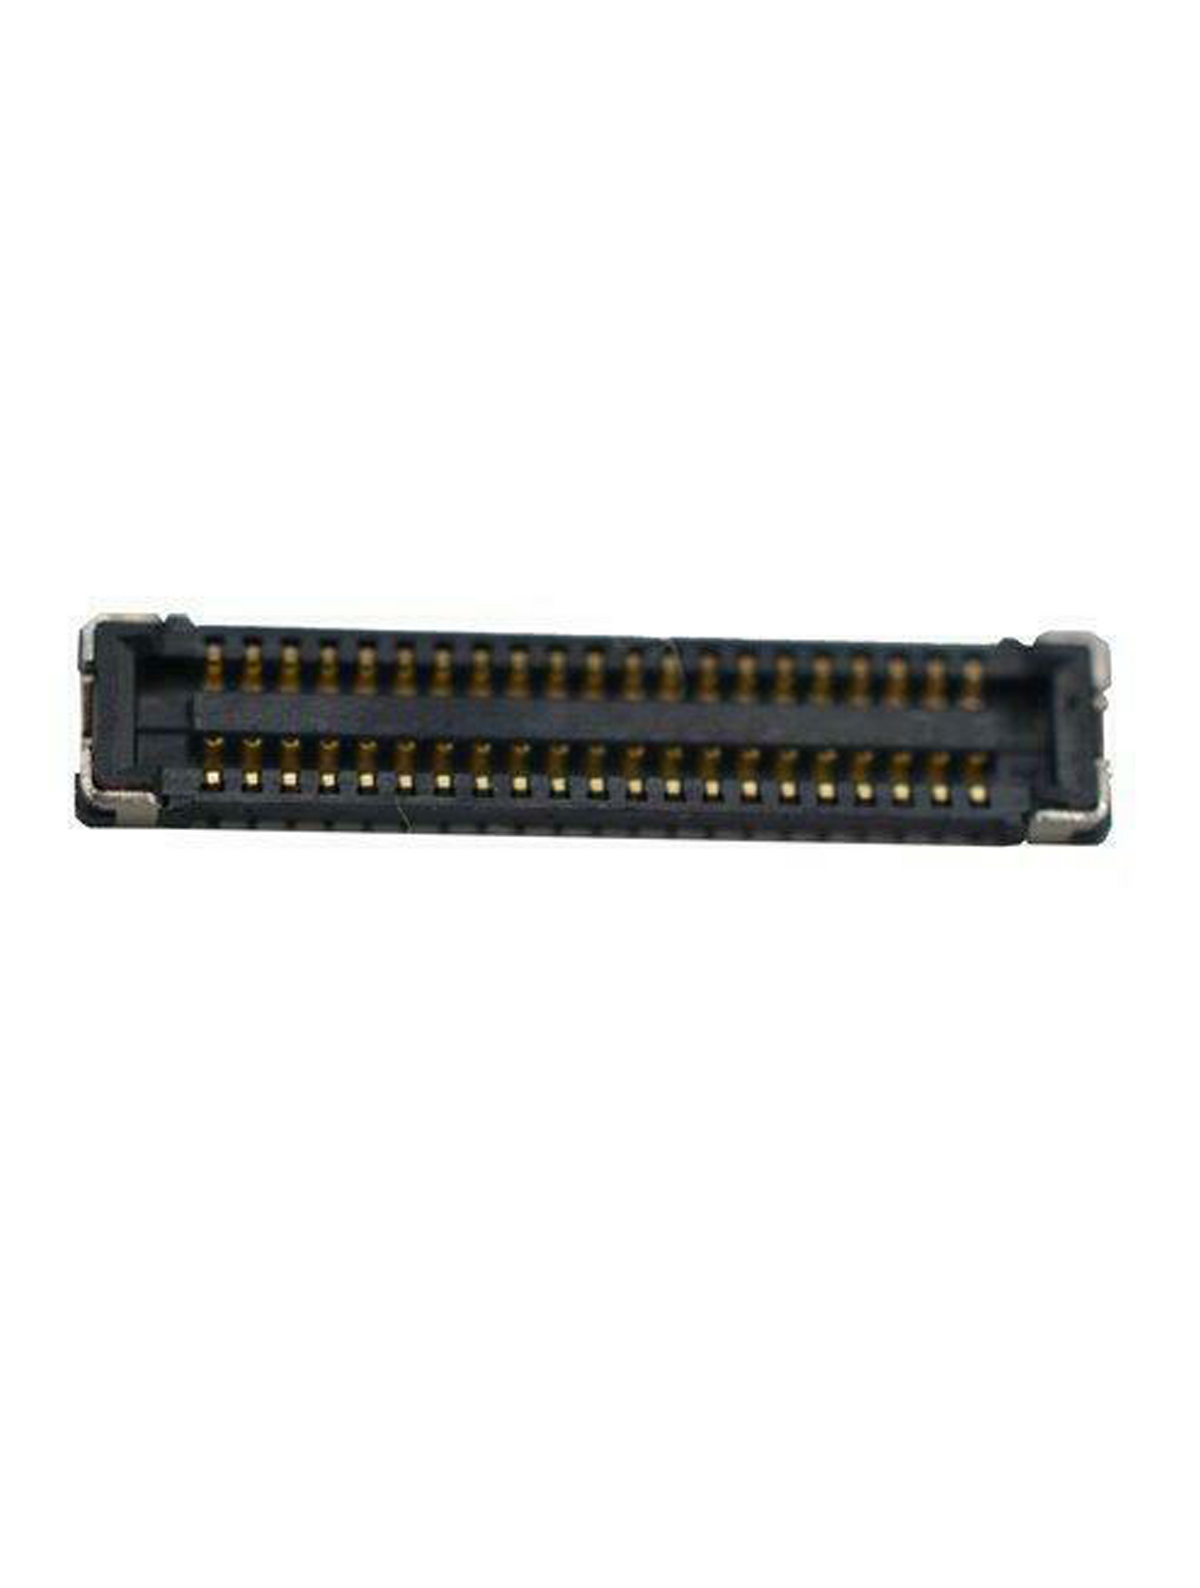 DIGITZIER FPC CONNECTOR (ON THE LCD FLEX NOT THE MOTHERBOARD) (68 PIN) FOR IPAD MINI 4